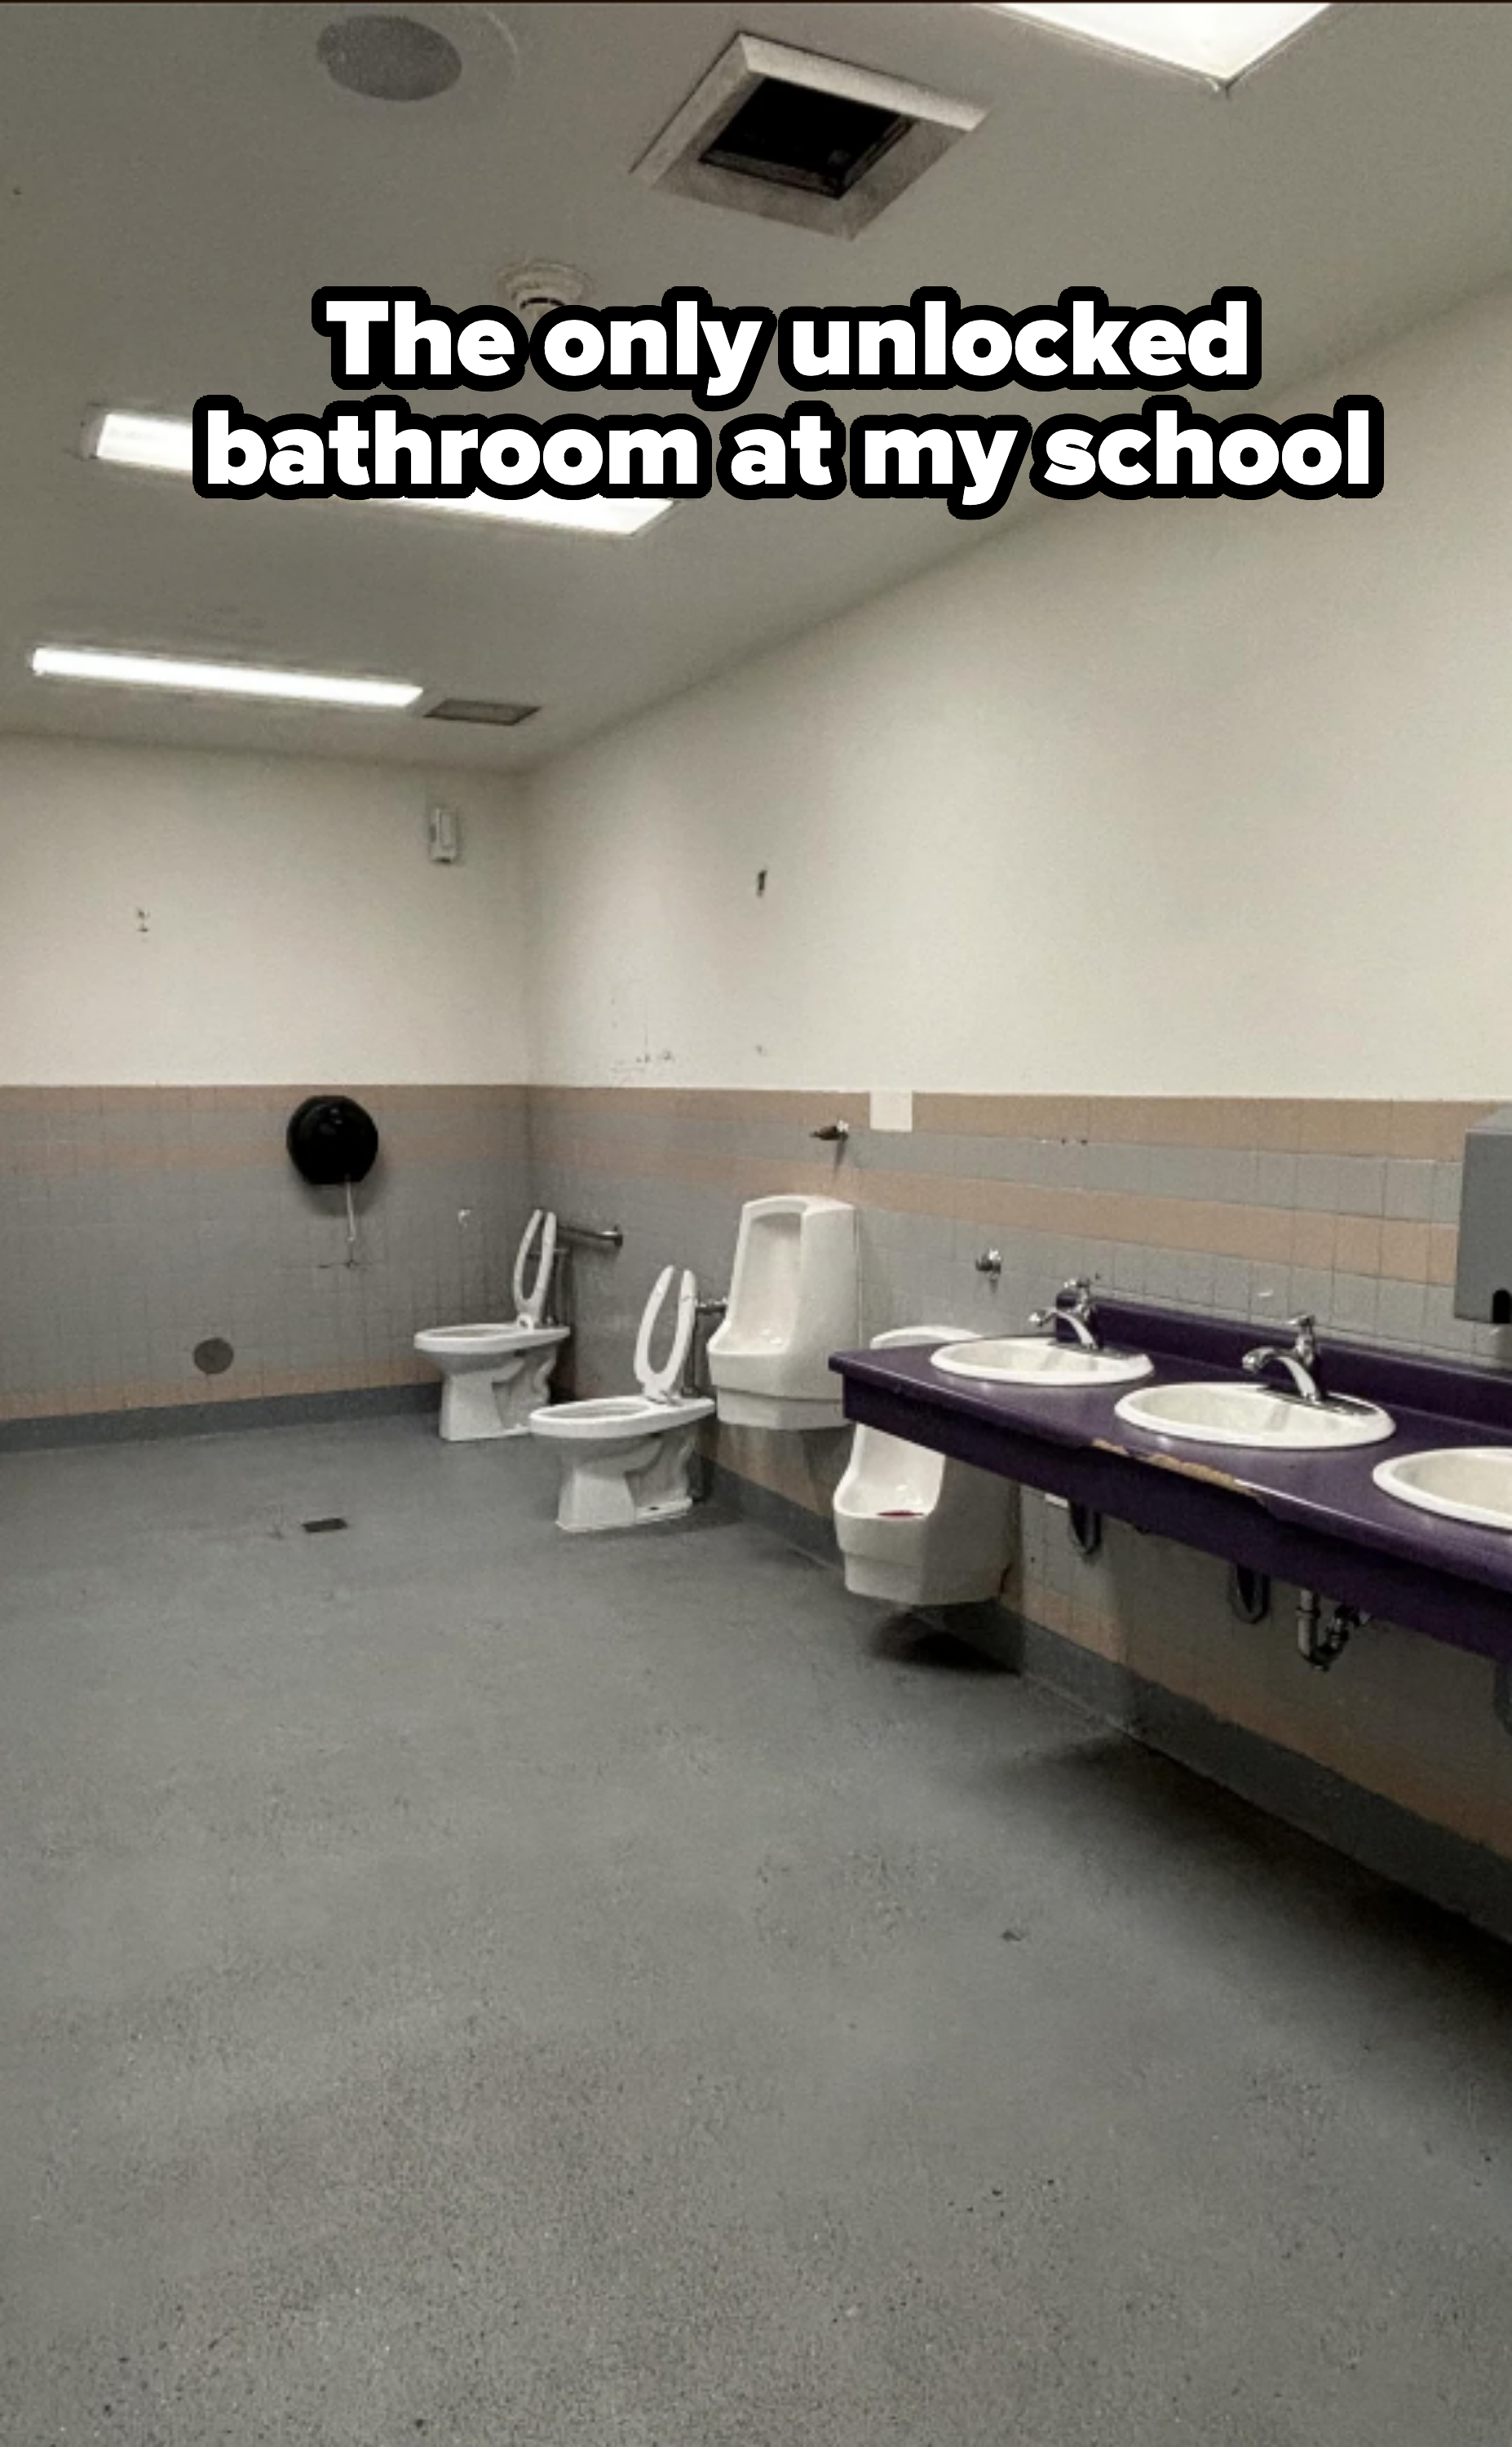 Public restroom with two toilets, a urinal, and a vanity with three sinks. The room is clean and brightly lit